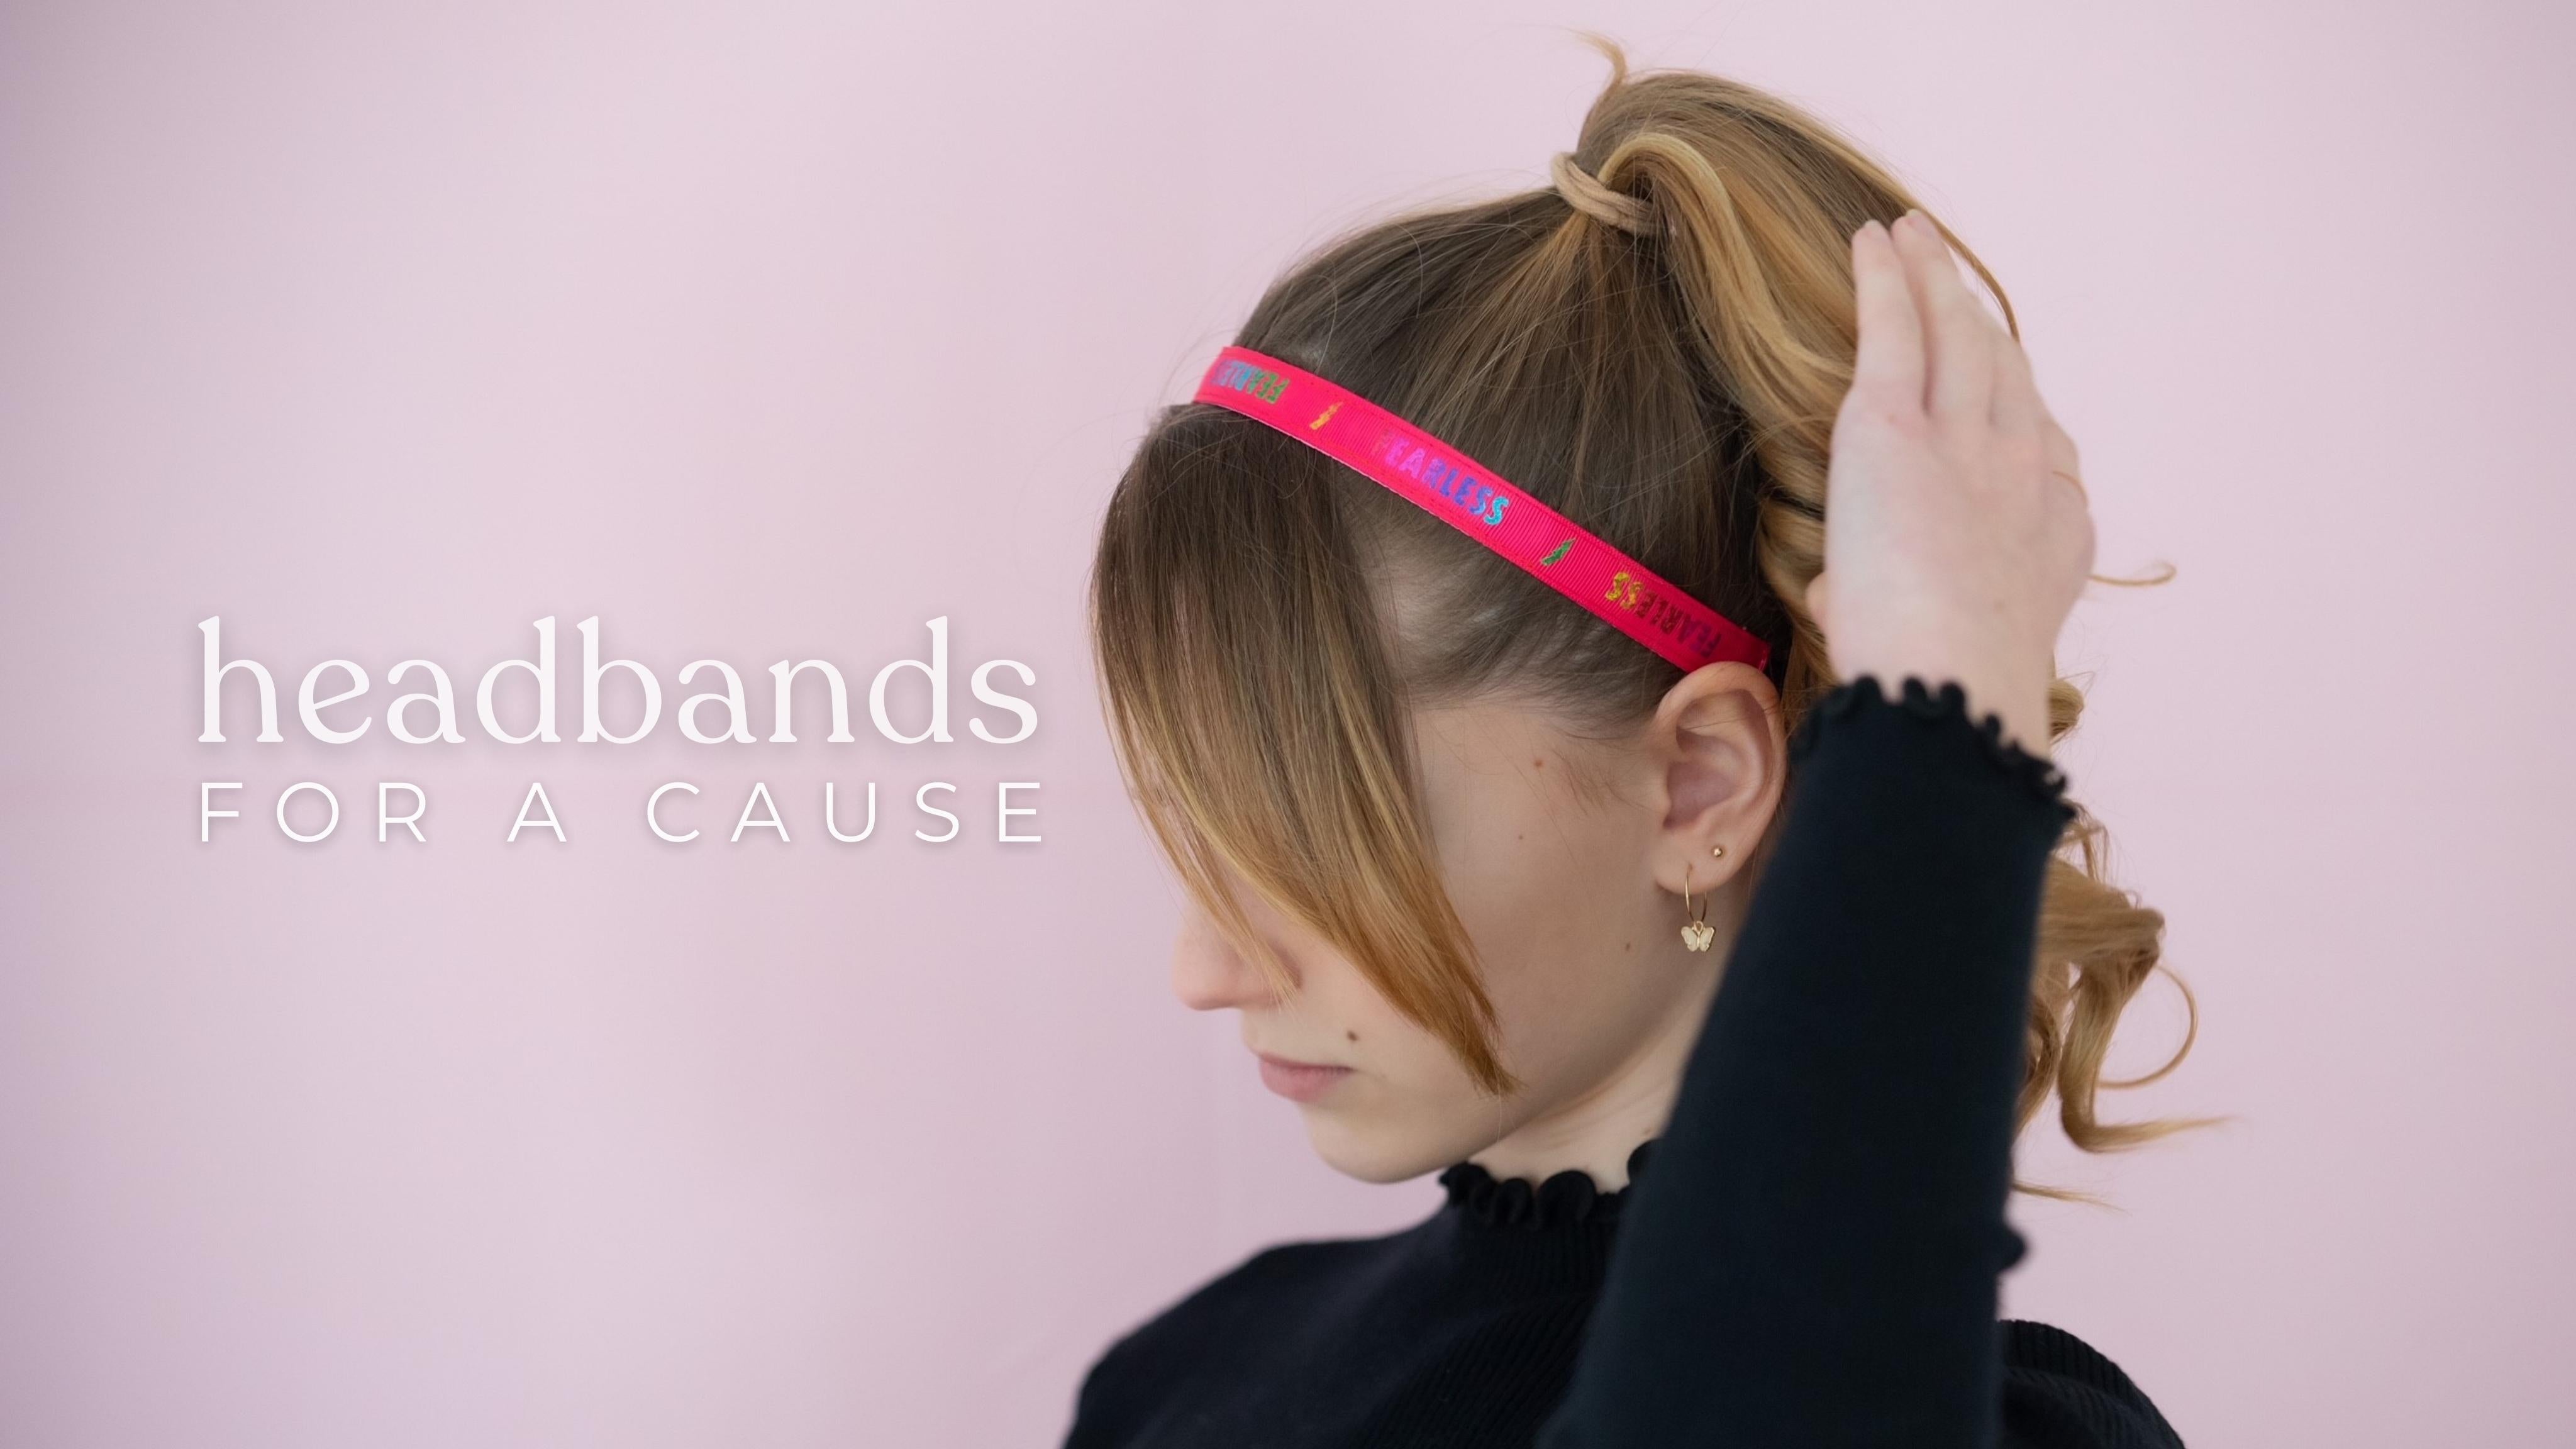 Headbands For A Cause